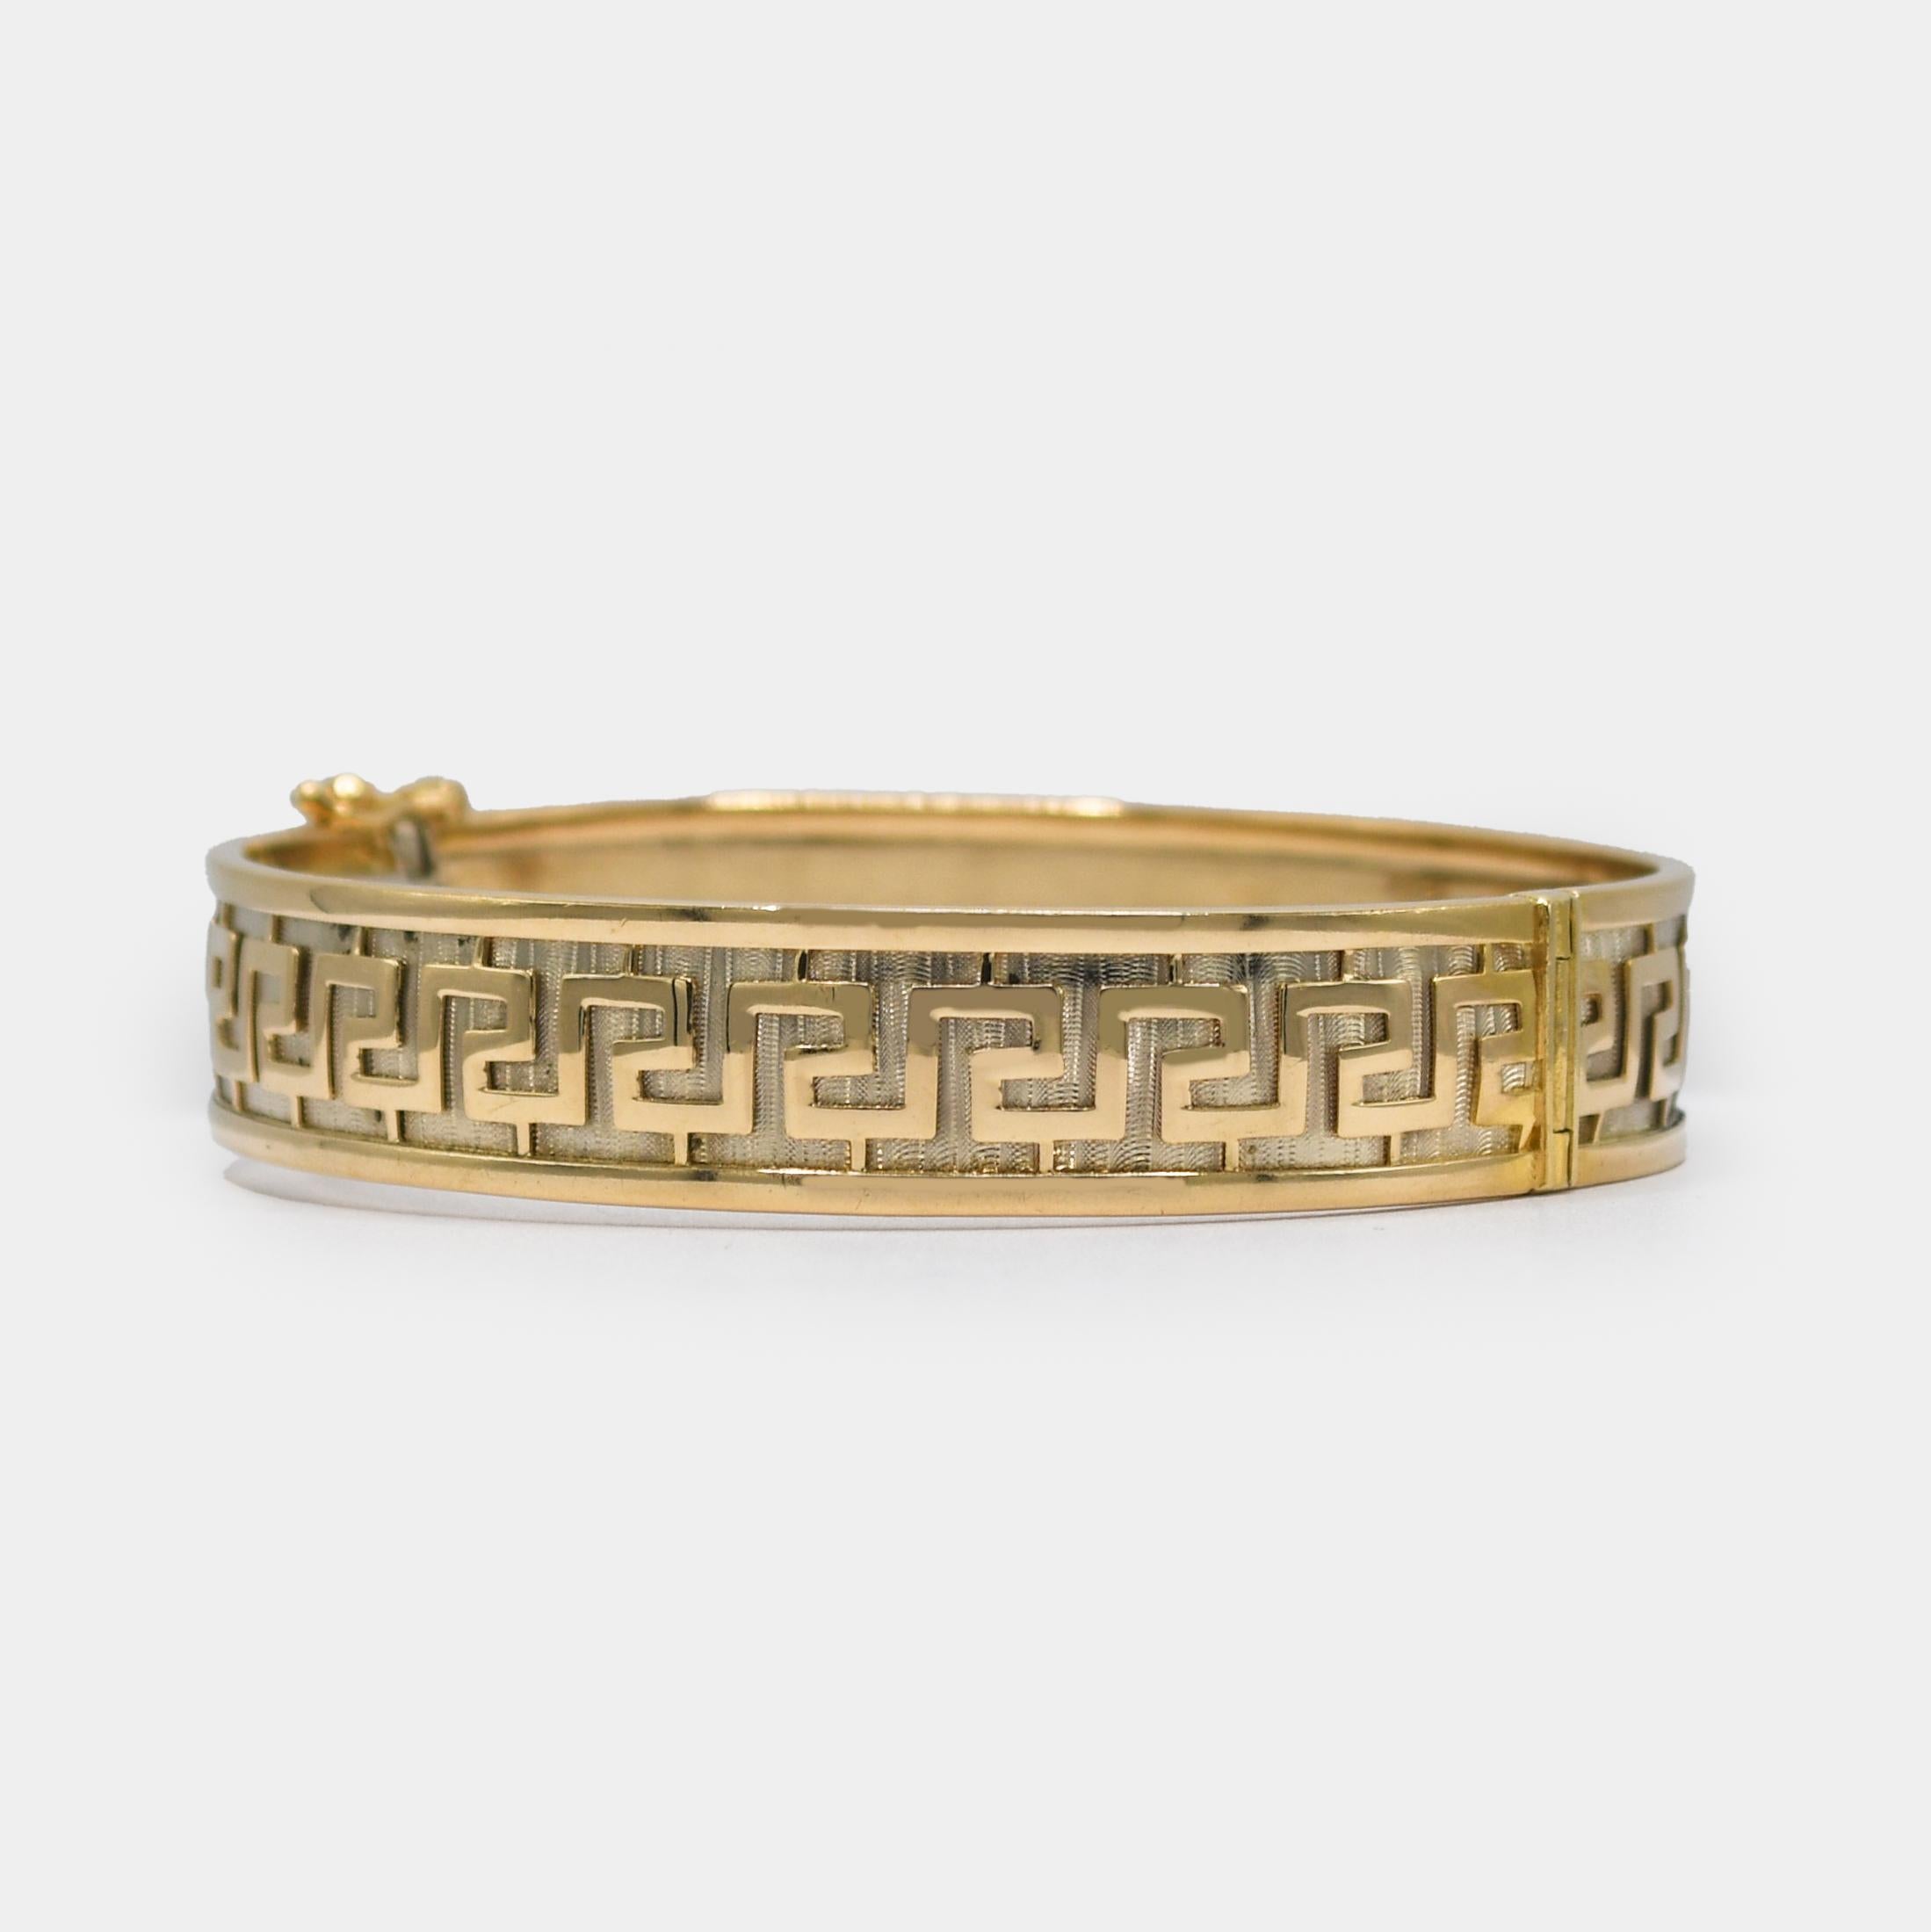 18K Yellow Gold Bangle Bracelet 28.9g
Ladies 18k yellow gold bangle bracelet.
Stamped 750 Italy and weighs 28.9 grams.
The bangle measures 12mm wide.
Inside circumference is 6 1/2 inches.
Two safety catches attached on the sides of the clasp.